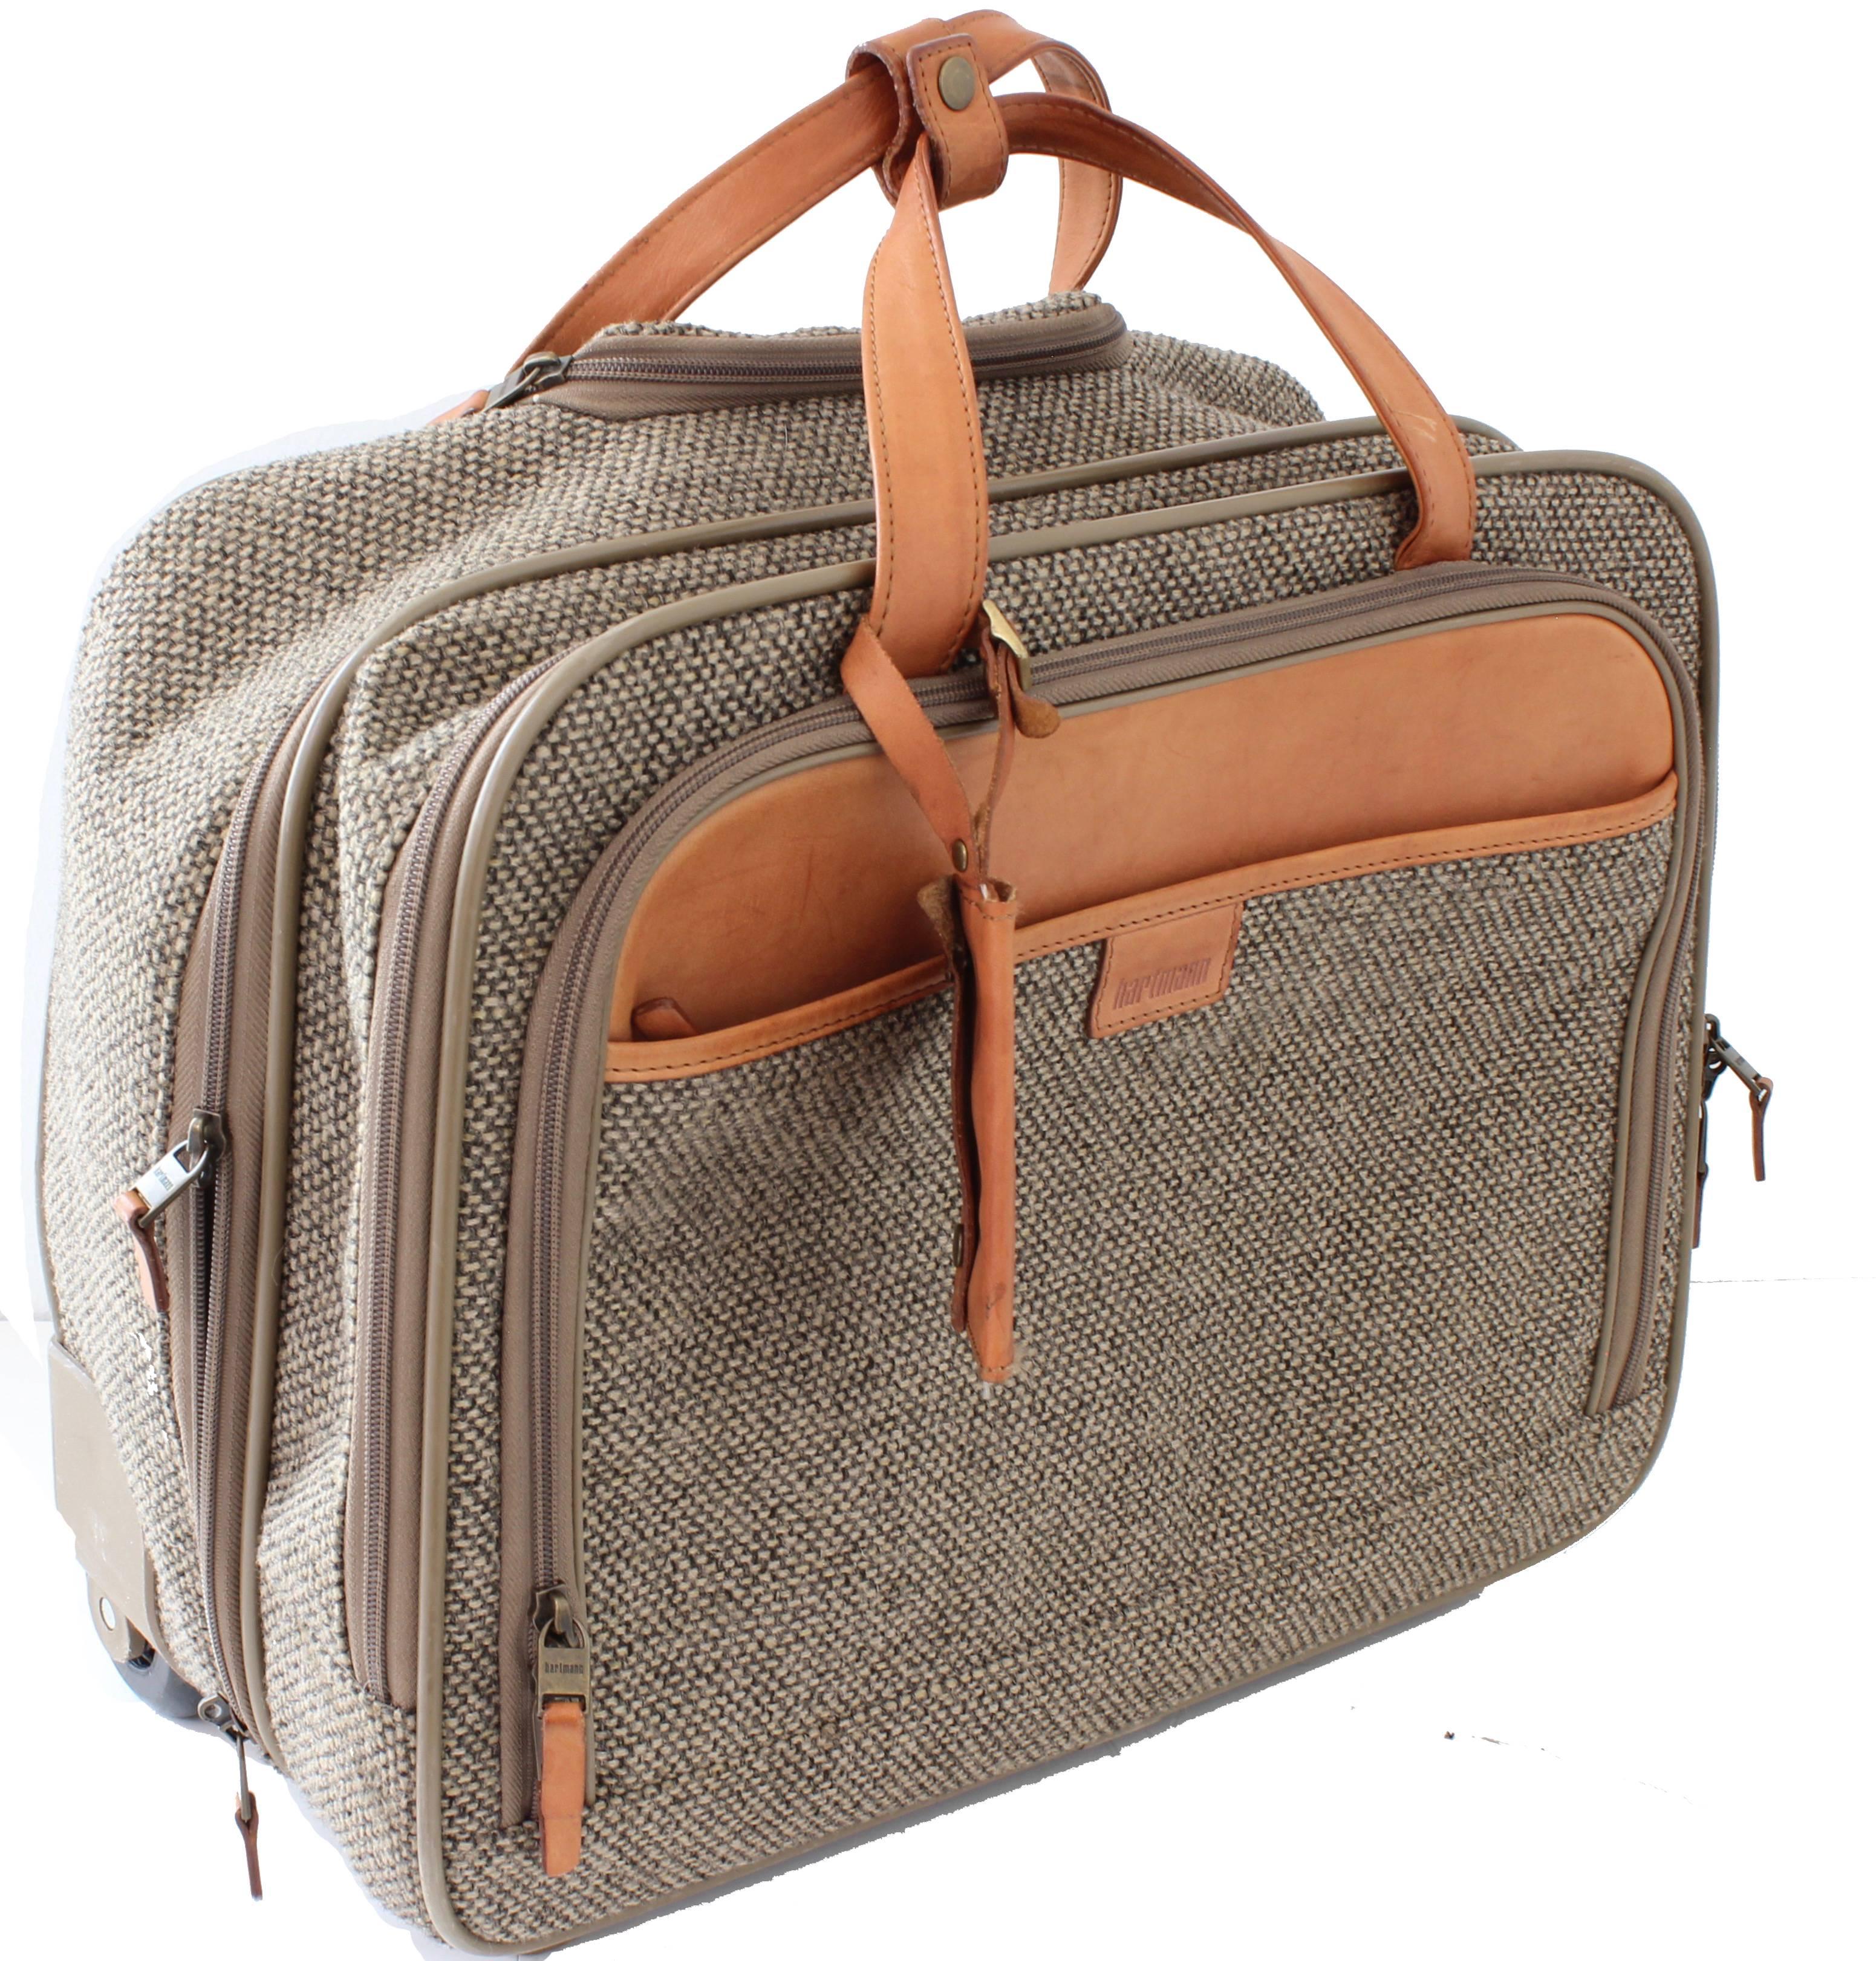 This tweed and leather roller bag was made by Hartmann Luggage, most likely in the late 1970s.  Perfect for business or travel, it features an expandable roller handle with leather insert, two interior compartments - one with an organizer trimmed in